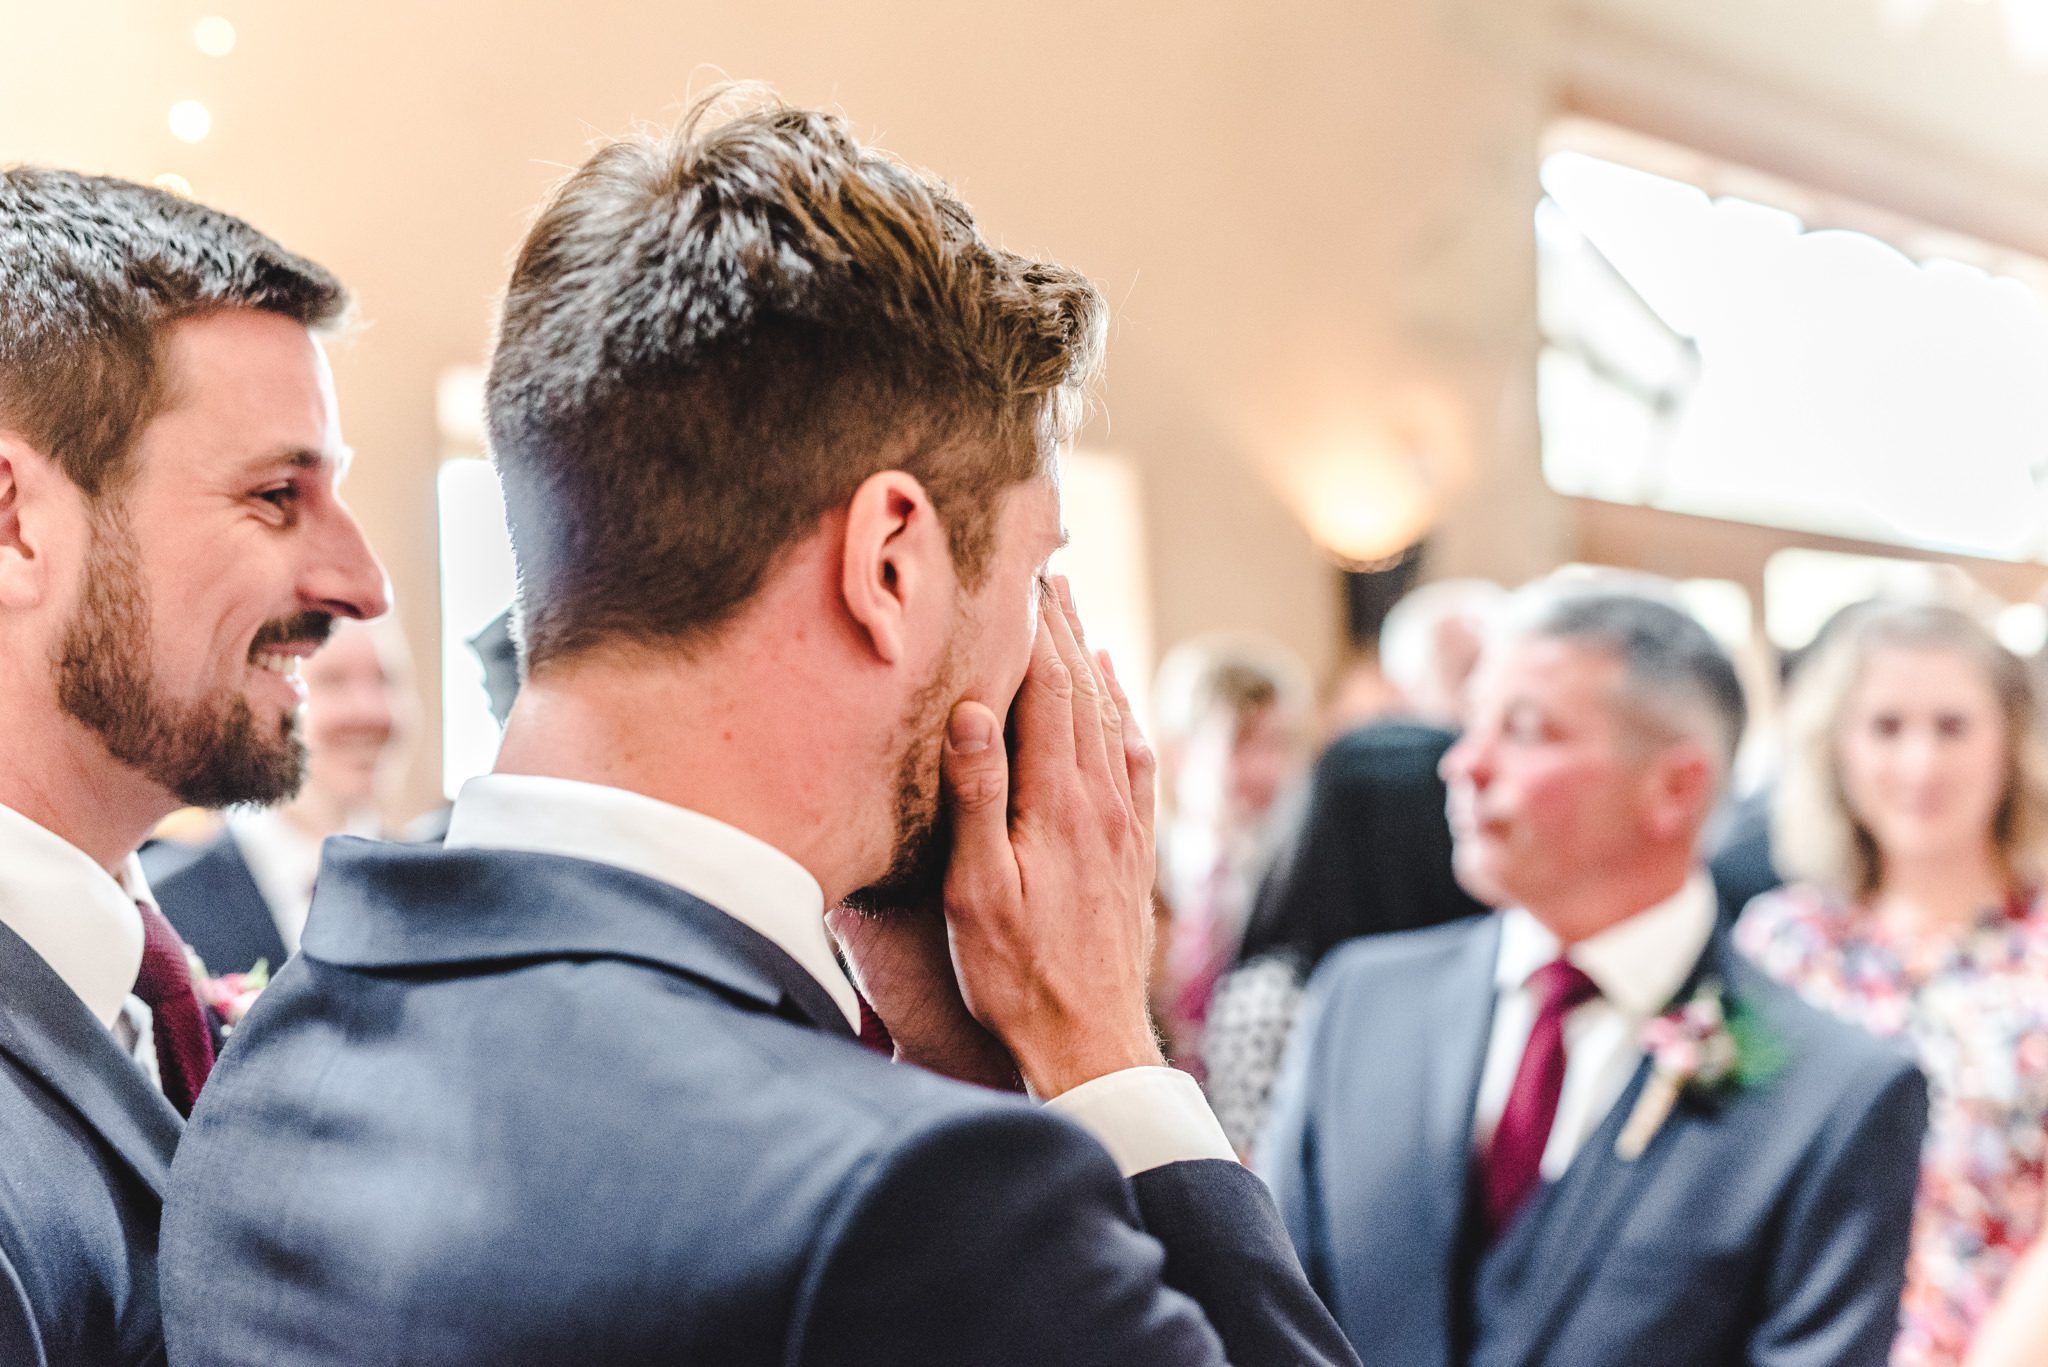 Groom seeing bride for the first time